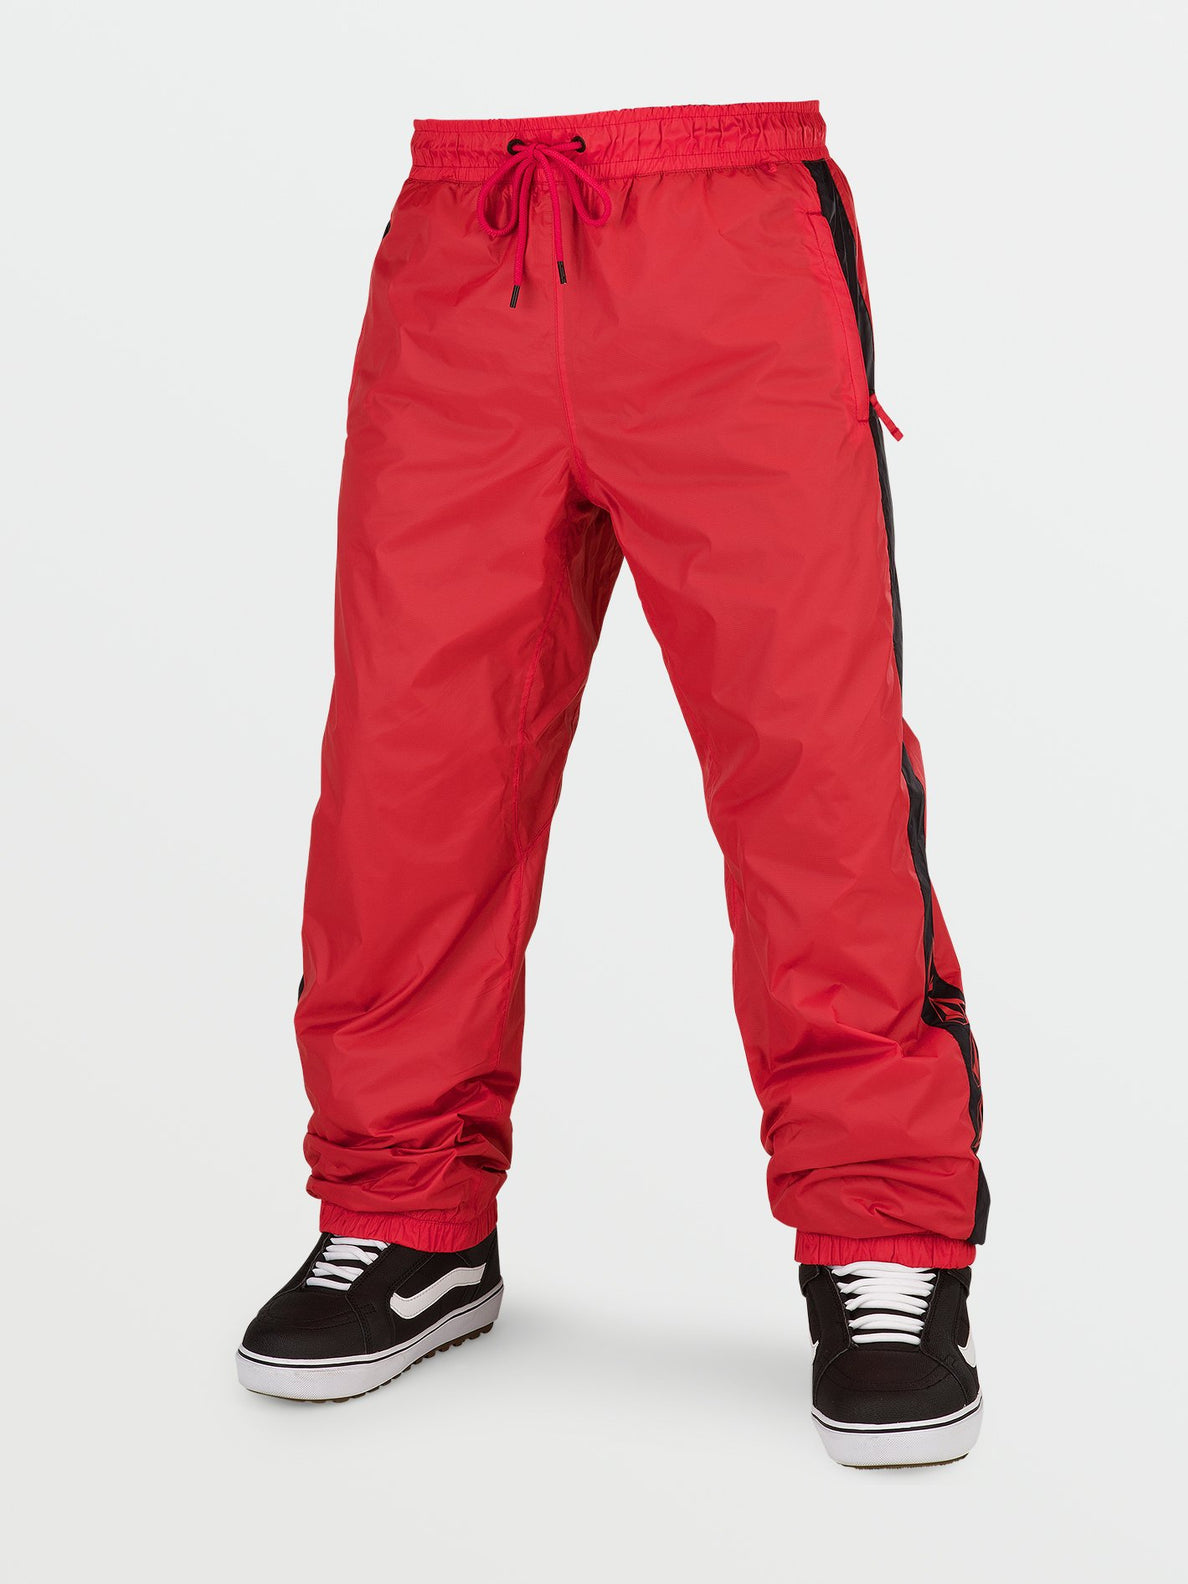 Slashlapper Trousers - RED (G1352210_RED) [F]